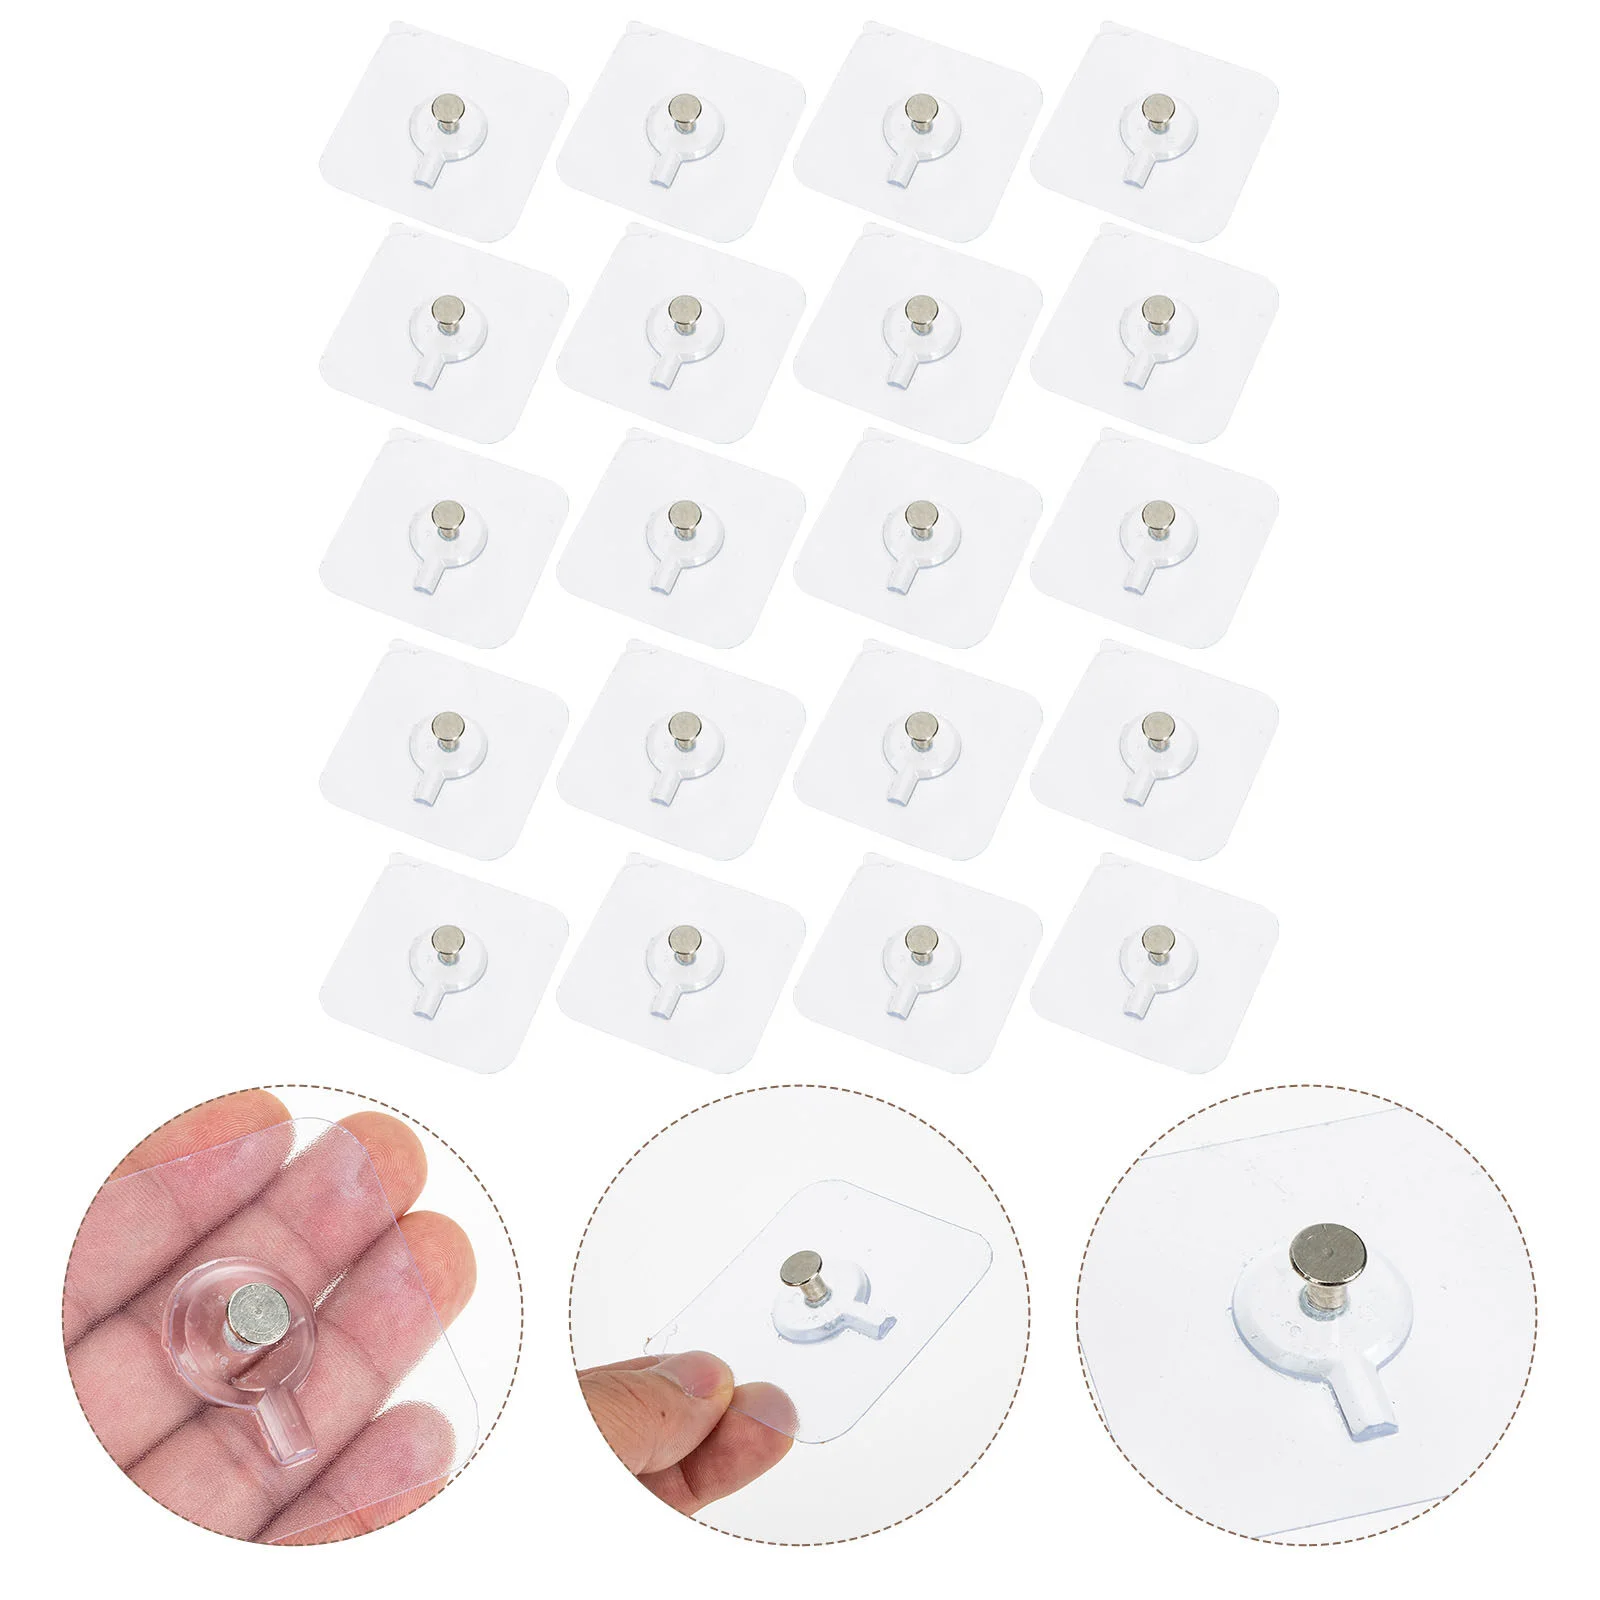 

20 Pcs No Trace Screw Sticker Self-adhesive Stickers Hooks Patches Heavy Duty Wall Picture Hanger Hangers Nail-free Kitchen